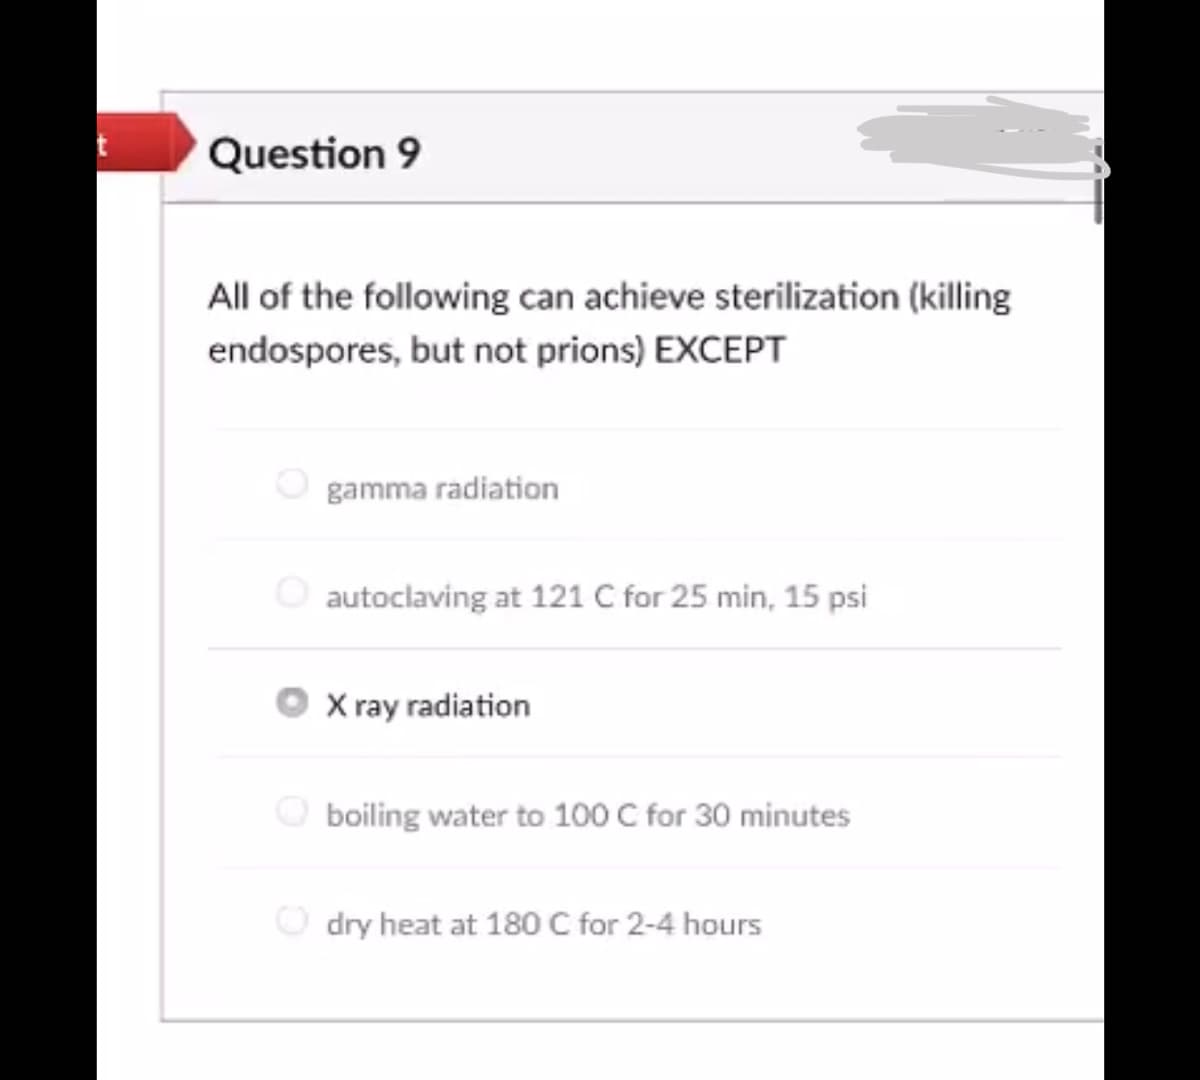 Question 9
All of the following can achieve sterilization (killing
endospores, but not prions) EXCEPT
O gamma radiation
autoclaving at 121 C for 25 min, 15 psi
X ray radiation
boiling water to 100 C for 30 minutes
dry heat at 180 C for 2-4 hours
